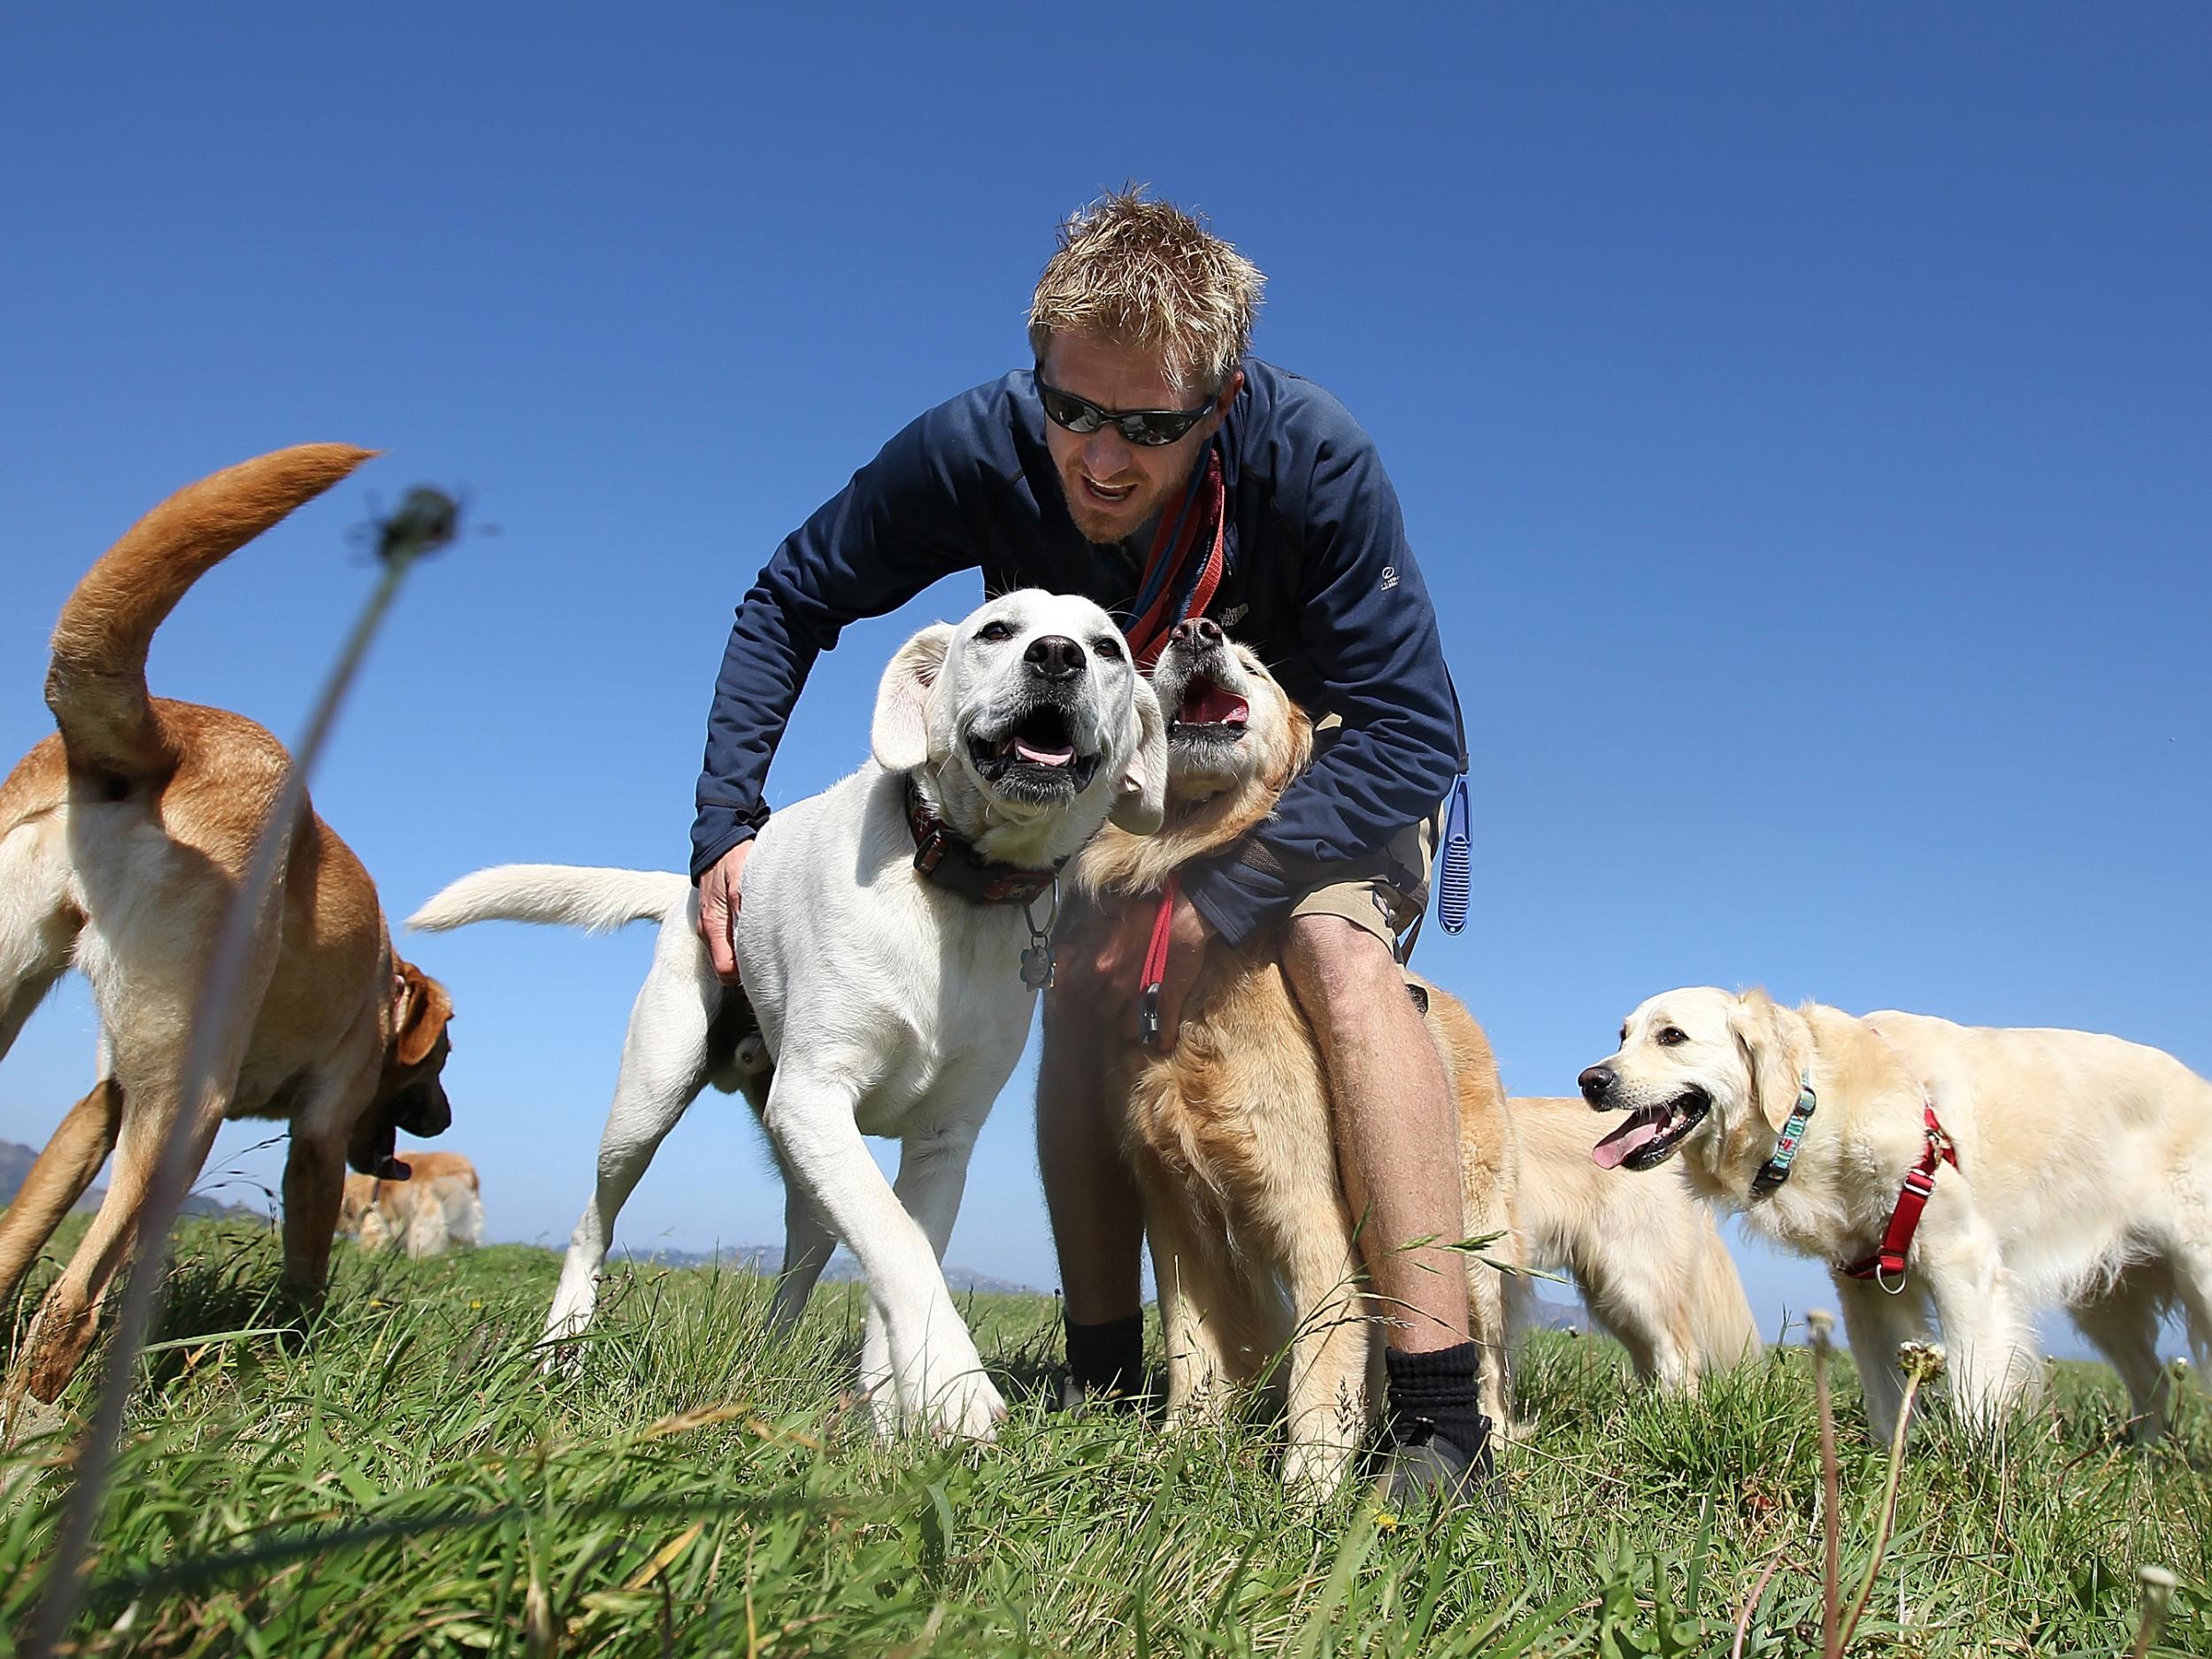 Man’s best friend: owning a dog has been linked with health benefits